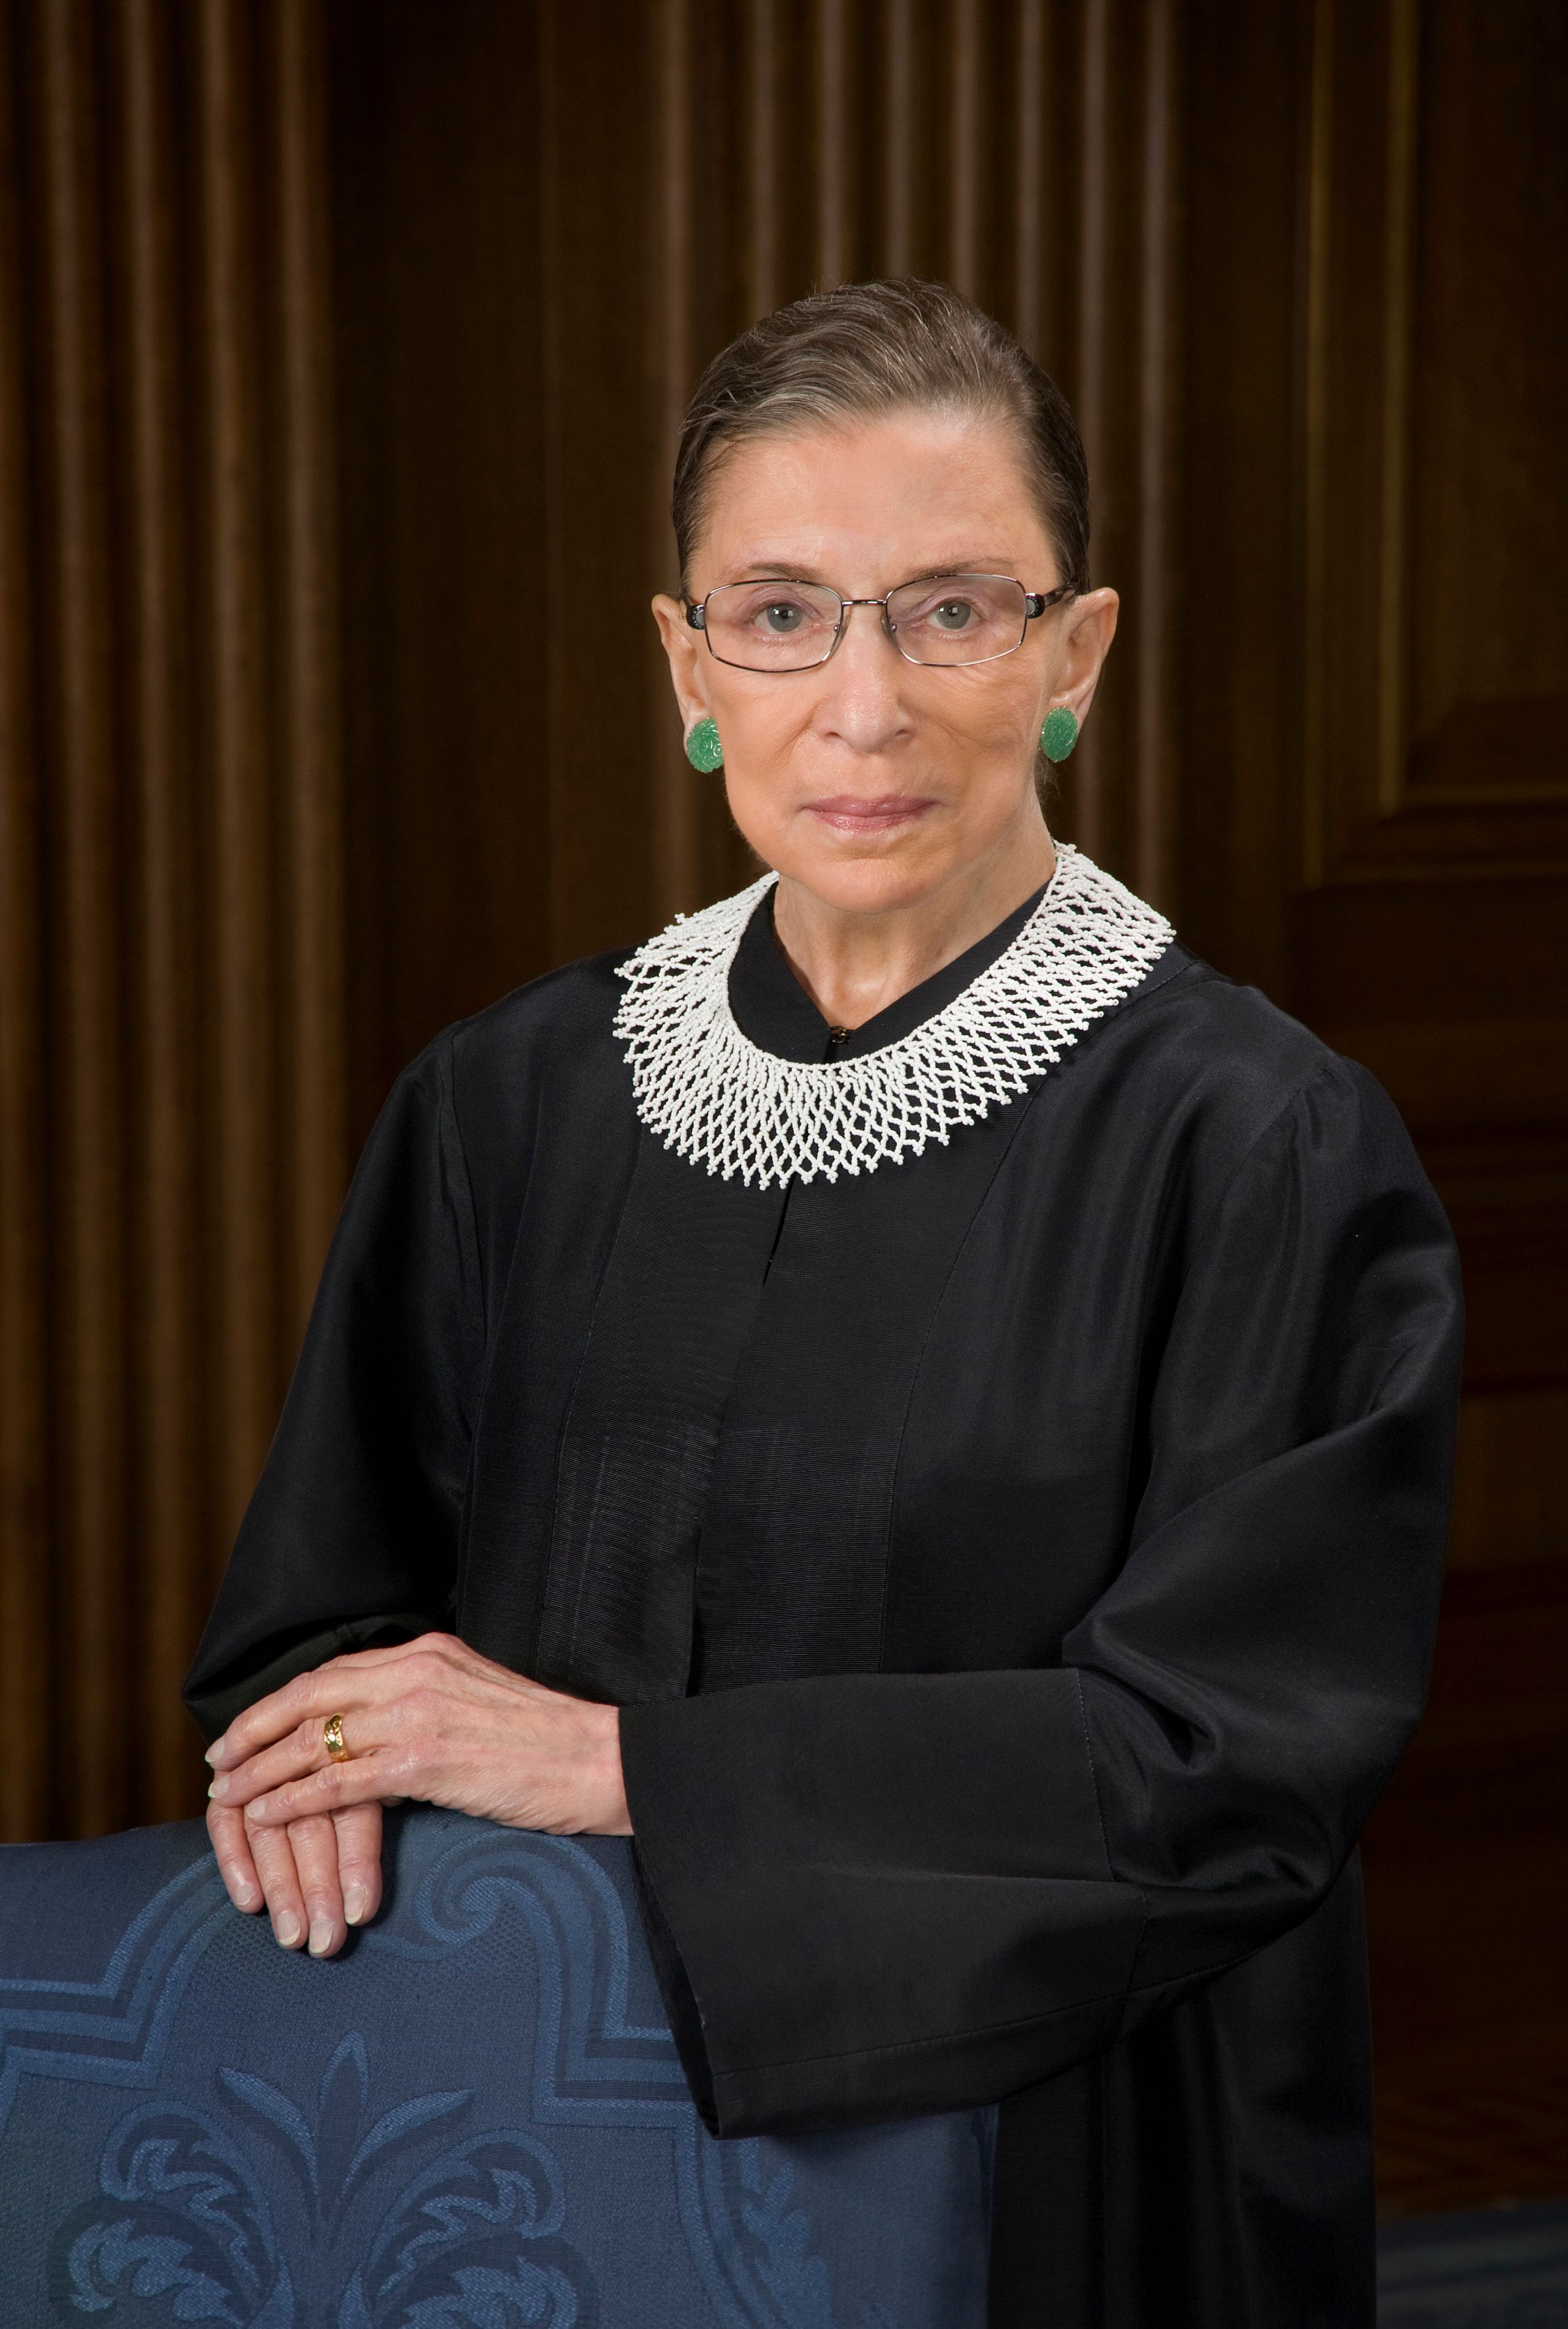 A photo of late Supreme Court Justice Ruth Bader Ginsburg on October 8, 2010. | Photo: Getty Images.